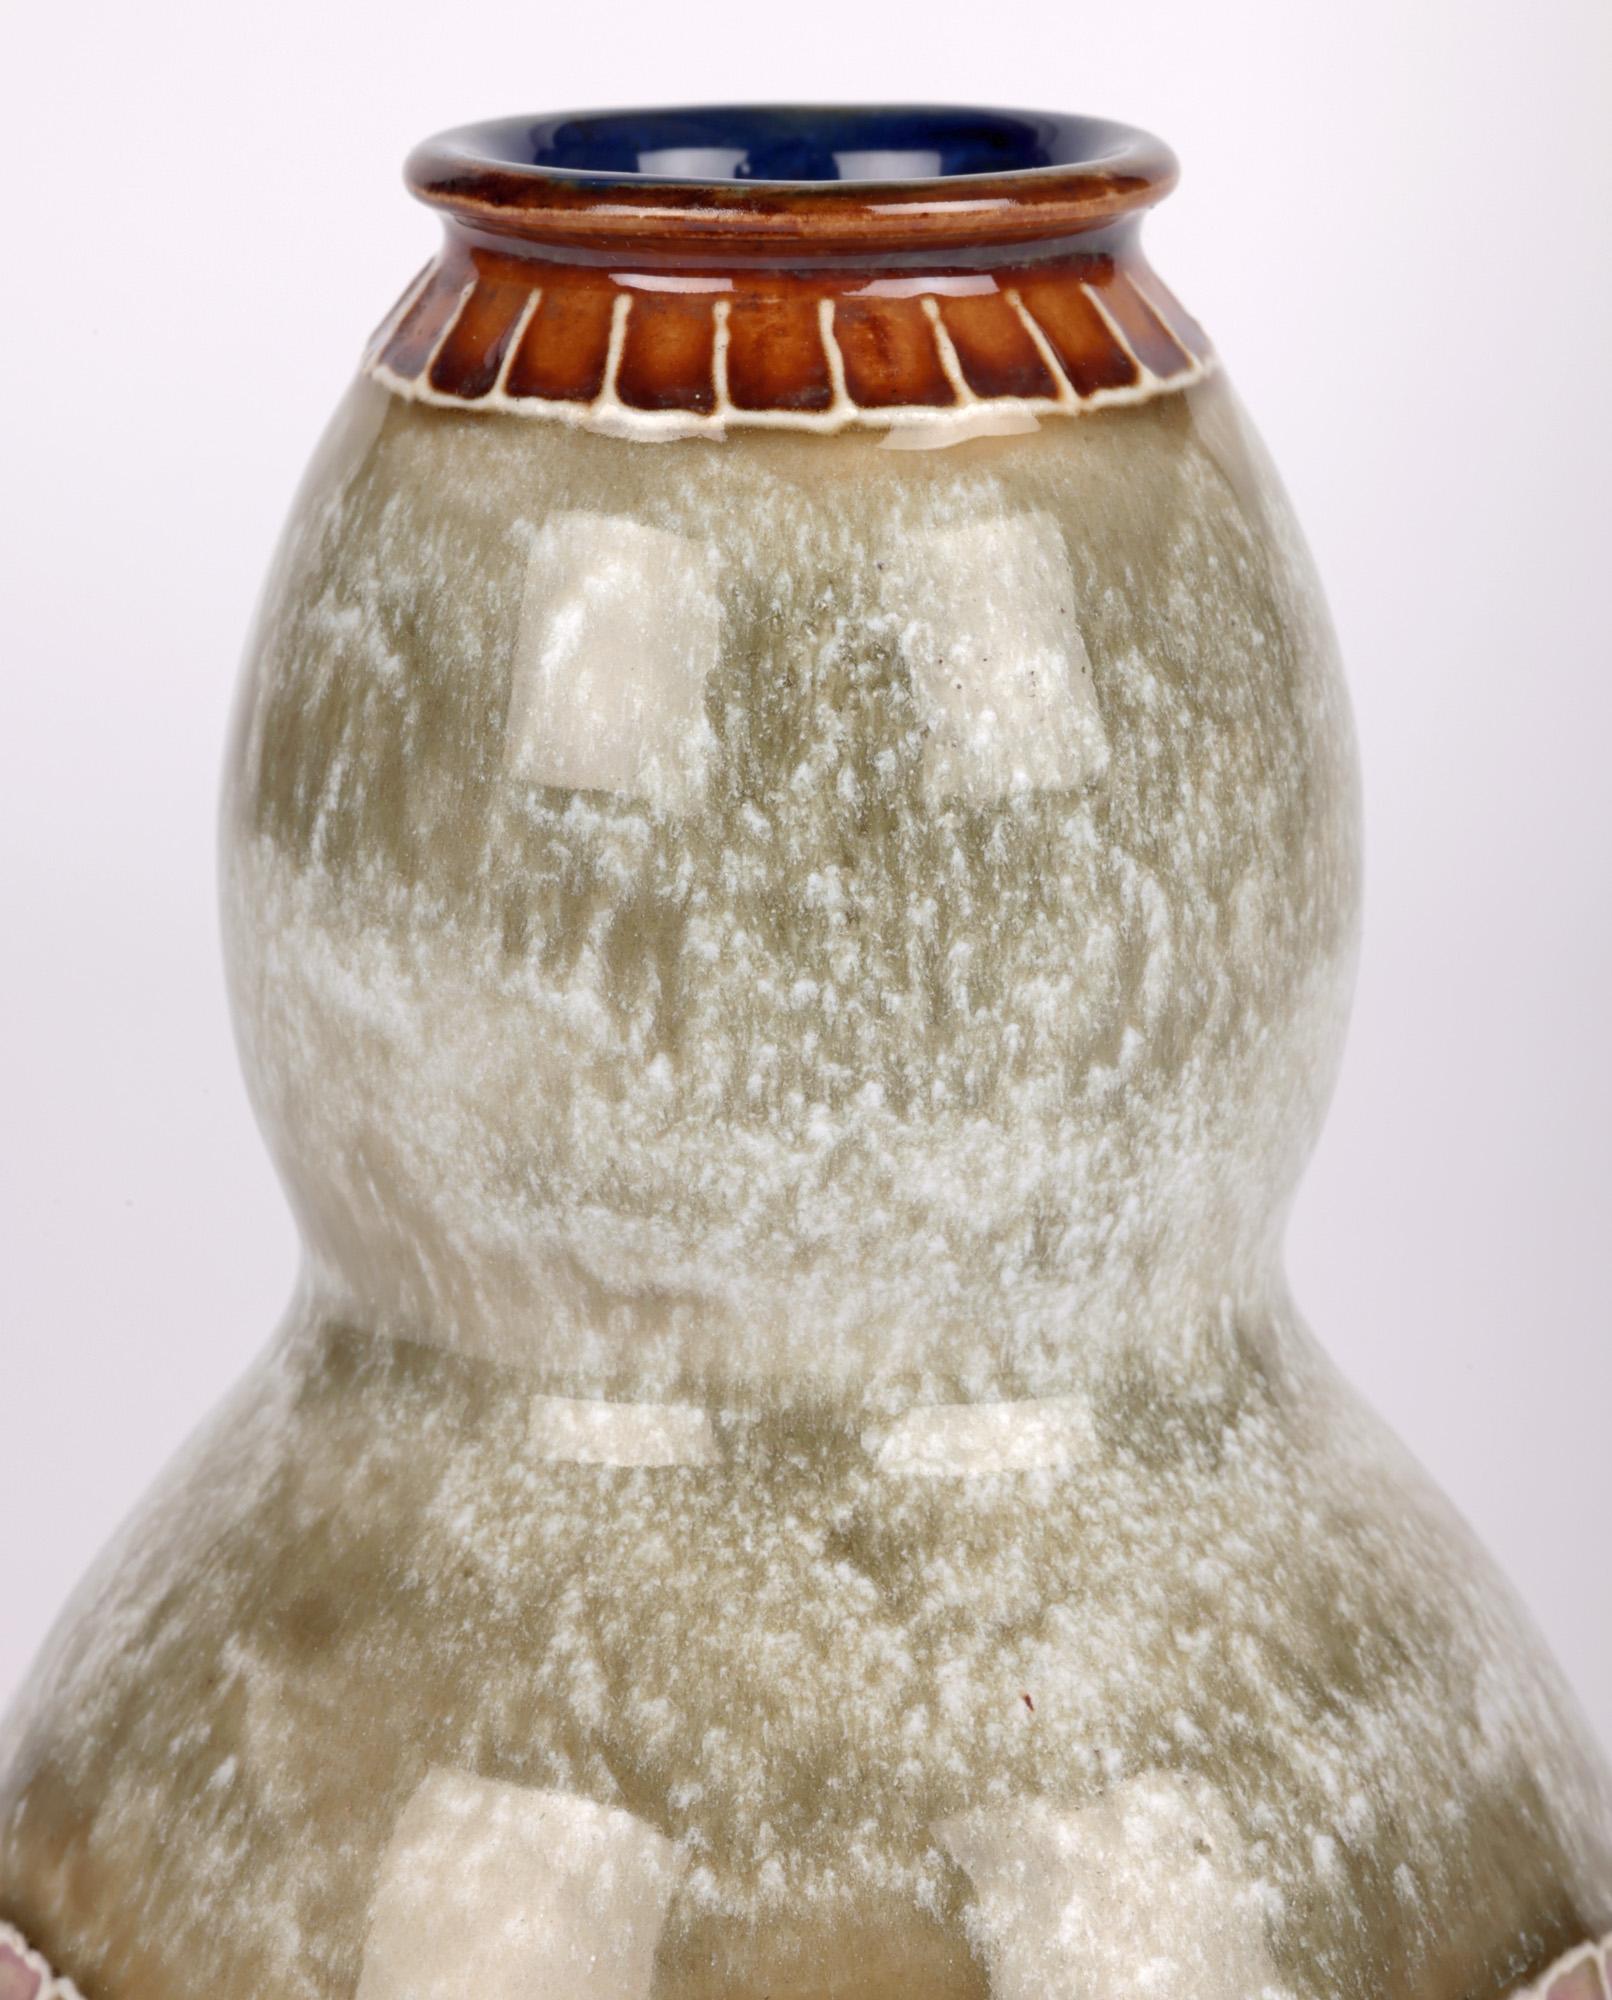 A stunning Doulton Lambeth art nouveau stylized fan shaped floral design vase by renowned artist Eliza Simmance and dated 1905. The stoneware vase is of double gourd shape standing on a flat unglazed narrow round foot with recessed base. The lower